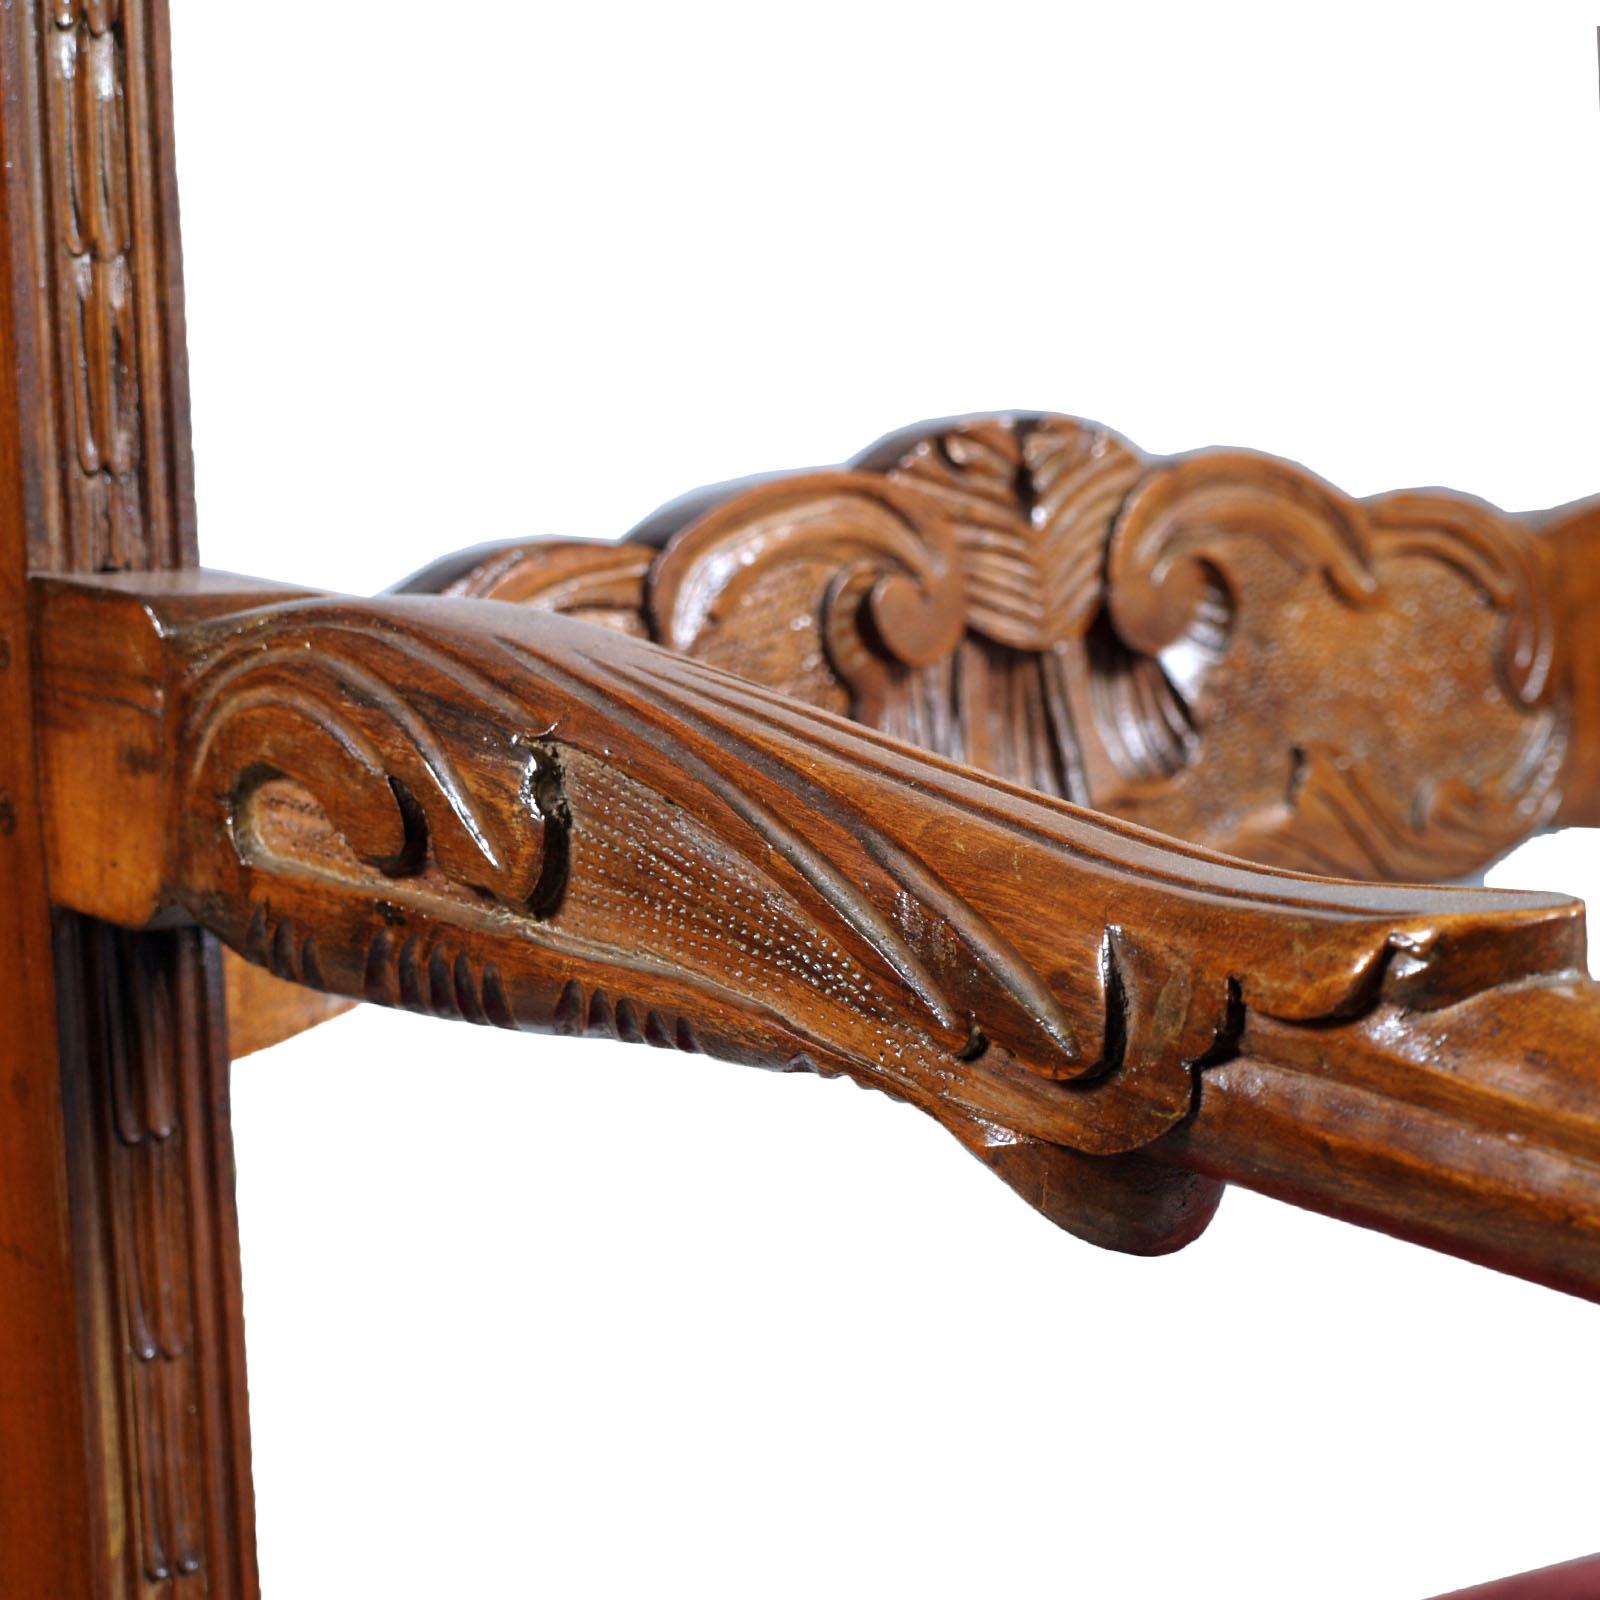 Hand-Carved 19th Century Refined Hand Carved Walnut Renaissance Ecclesiastical Throne Chair For Sale